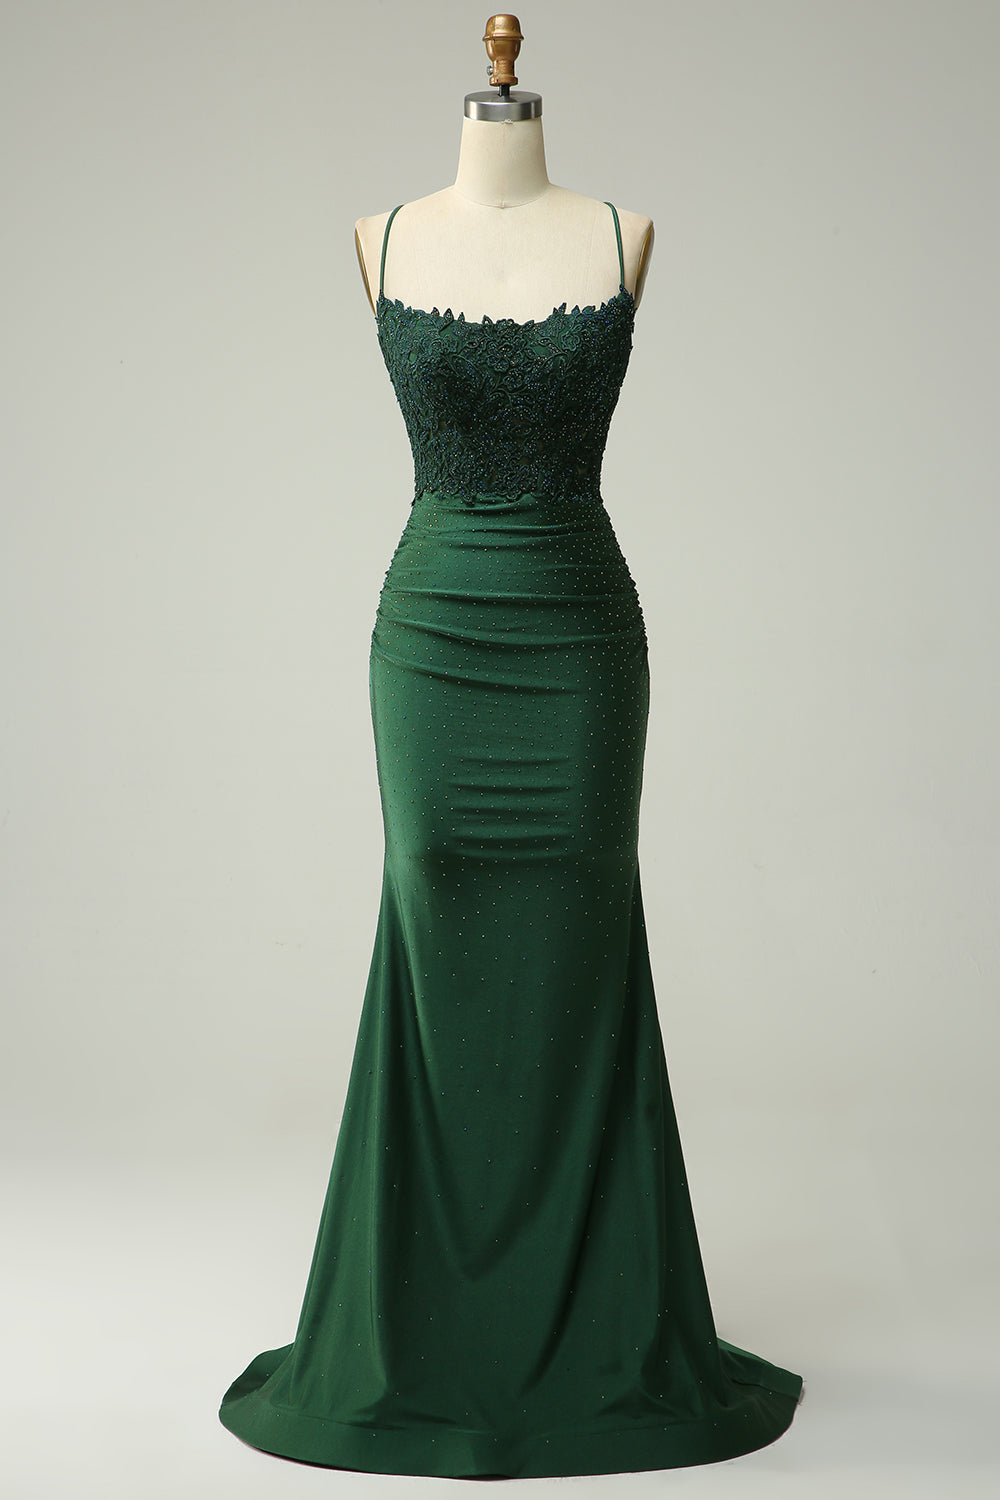 Sparkly Dark Green Beaded Long Corset Prom Dress with Appliques Gowns, Party Dress Night Out